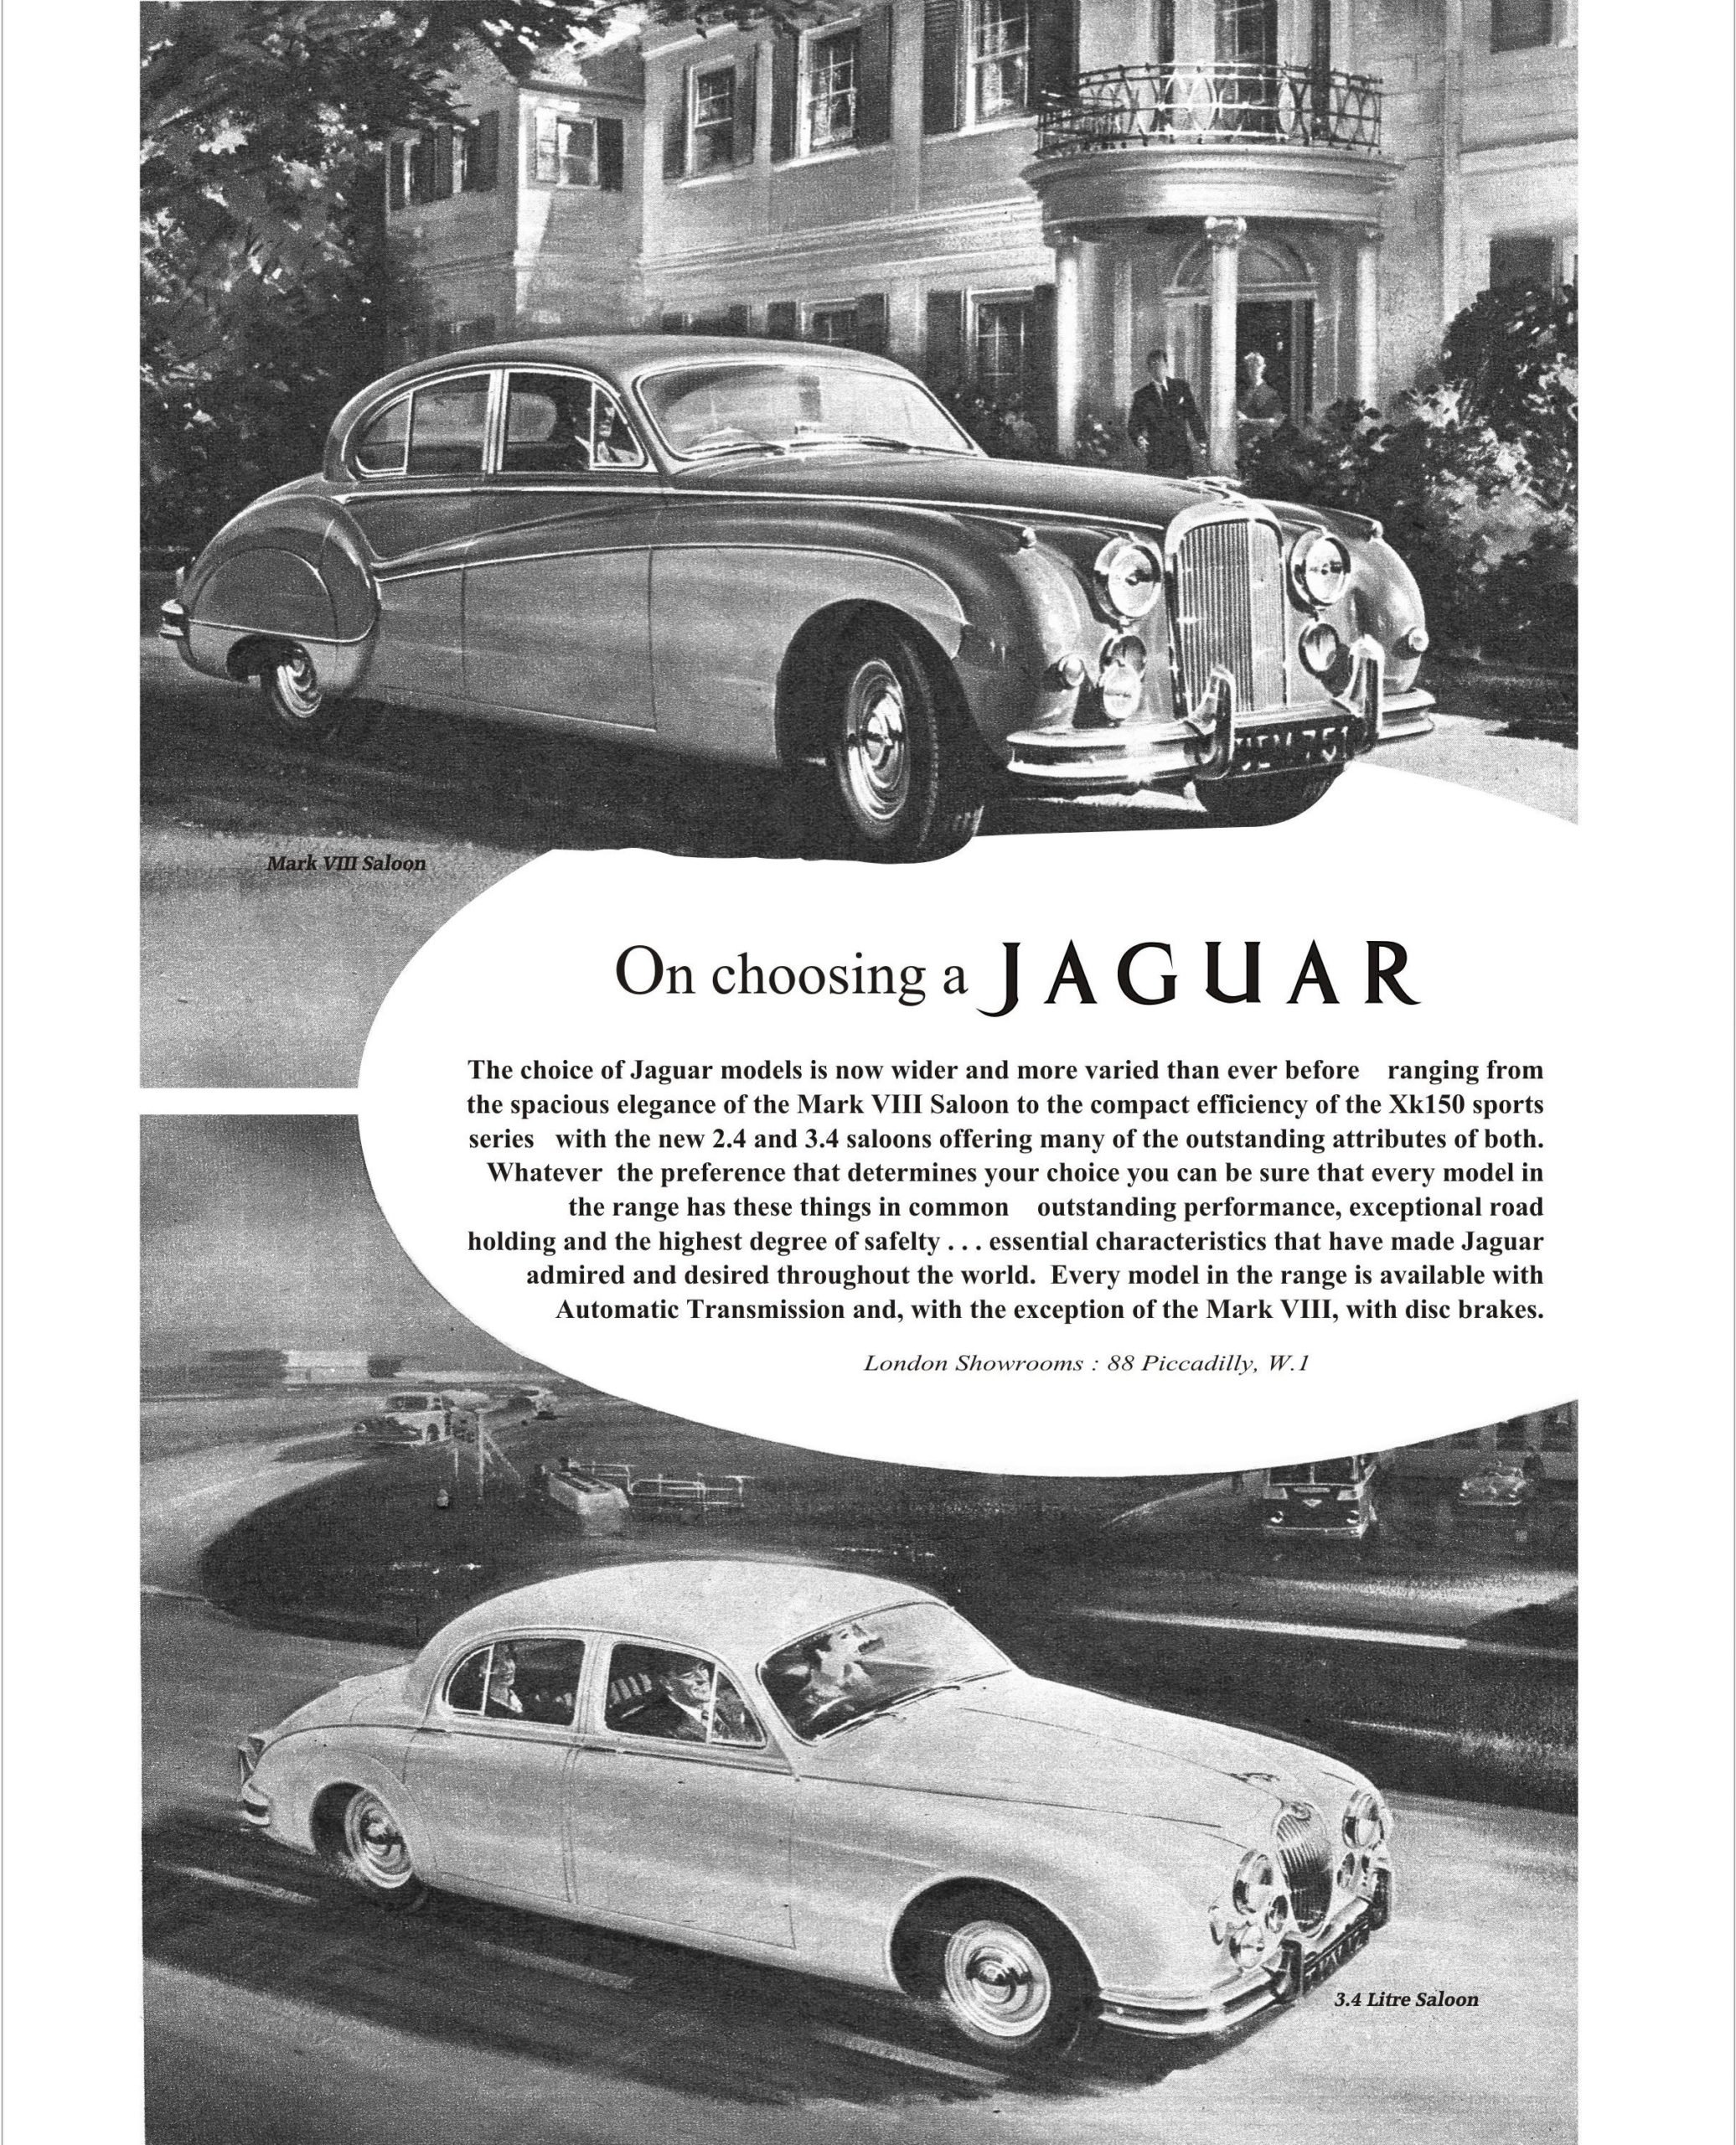 A Brief History of the Jaguar Mark II - The British Bank Robber's 